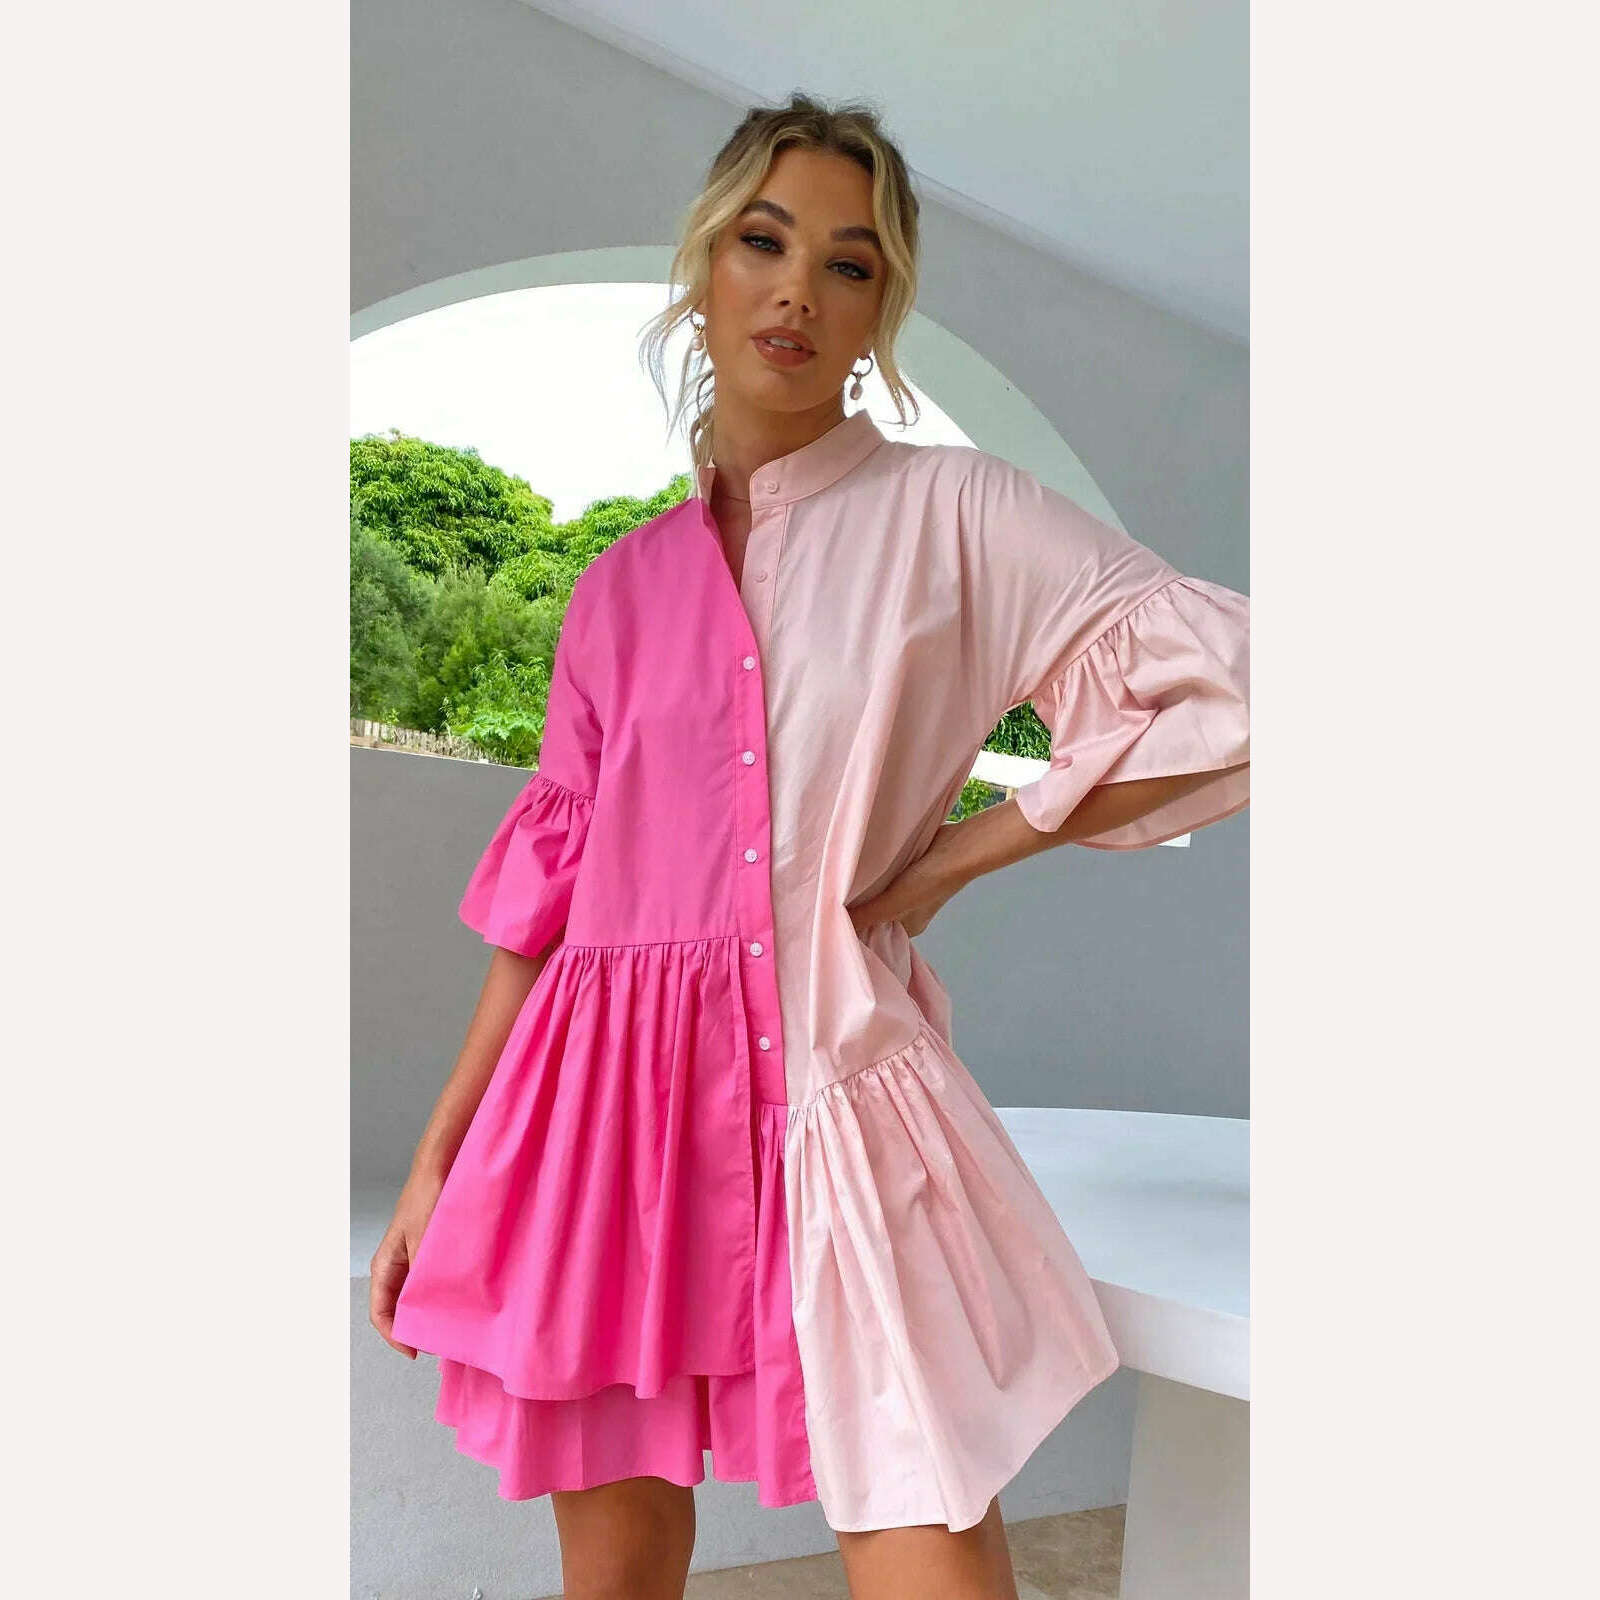 KIMLUD, Women Dresses Patchwork Tiered Ruffle Layer Floral Balloon Vintage Elegant Flared Half Sleeve O-Neck Dress Relaxed Mini Dresses, Pink / S, KIMLUD Women's Clothes